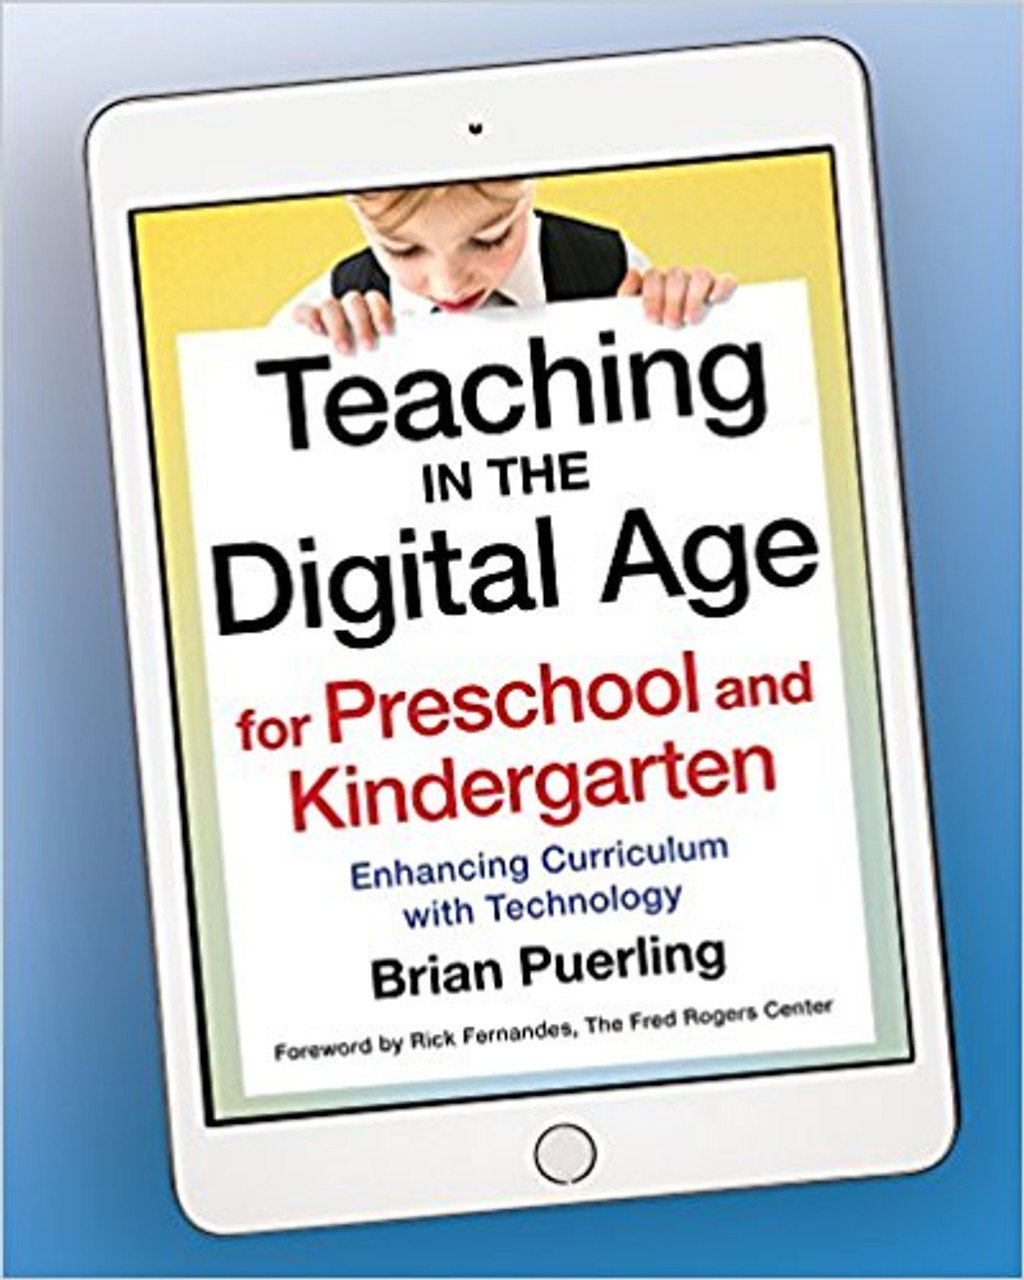 Teaching in the Digital Age for Preschool and Kindergrten: Enhancing Curriculum with Technology by Brian Puerling